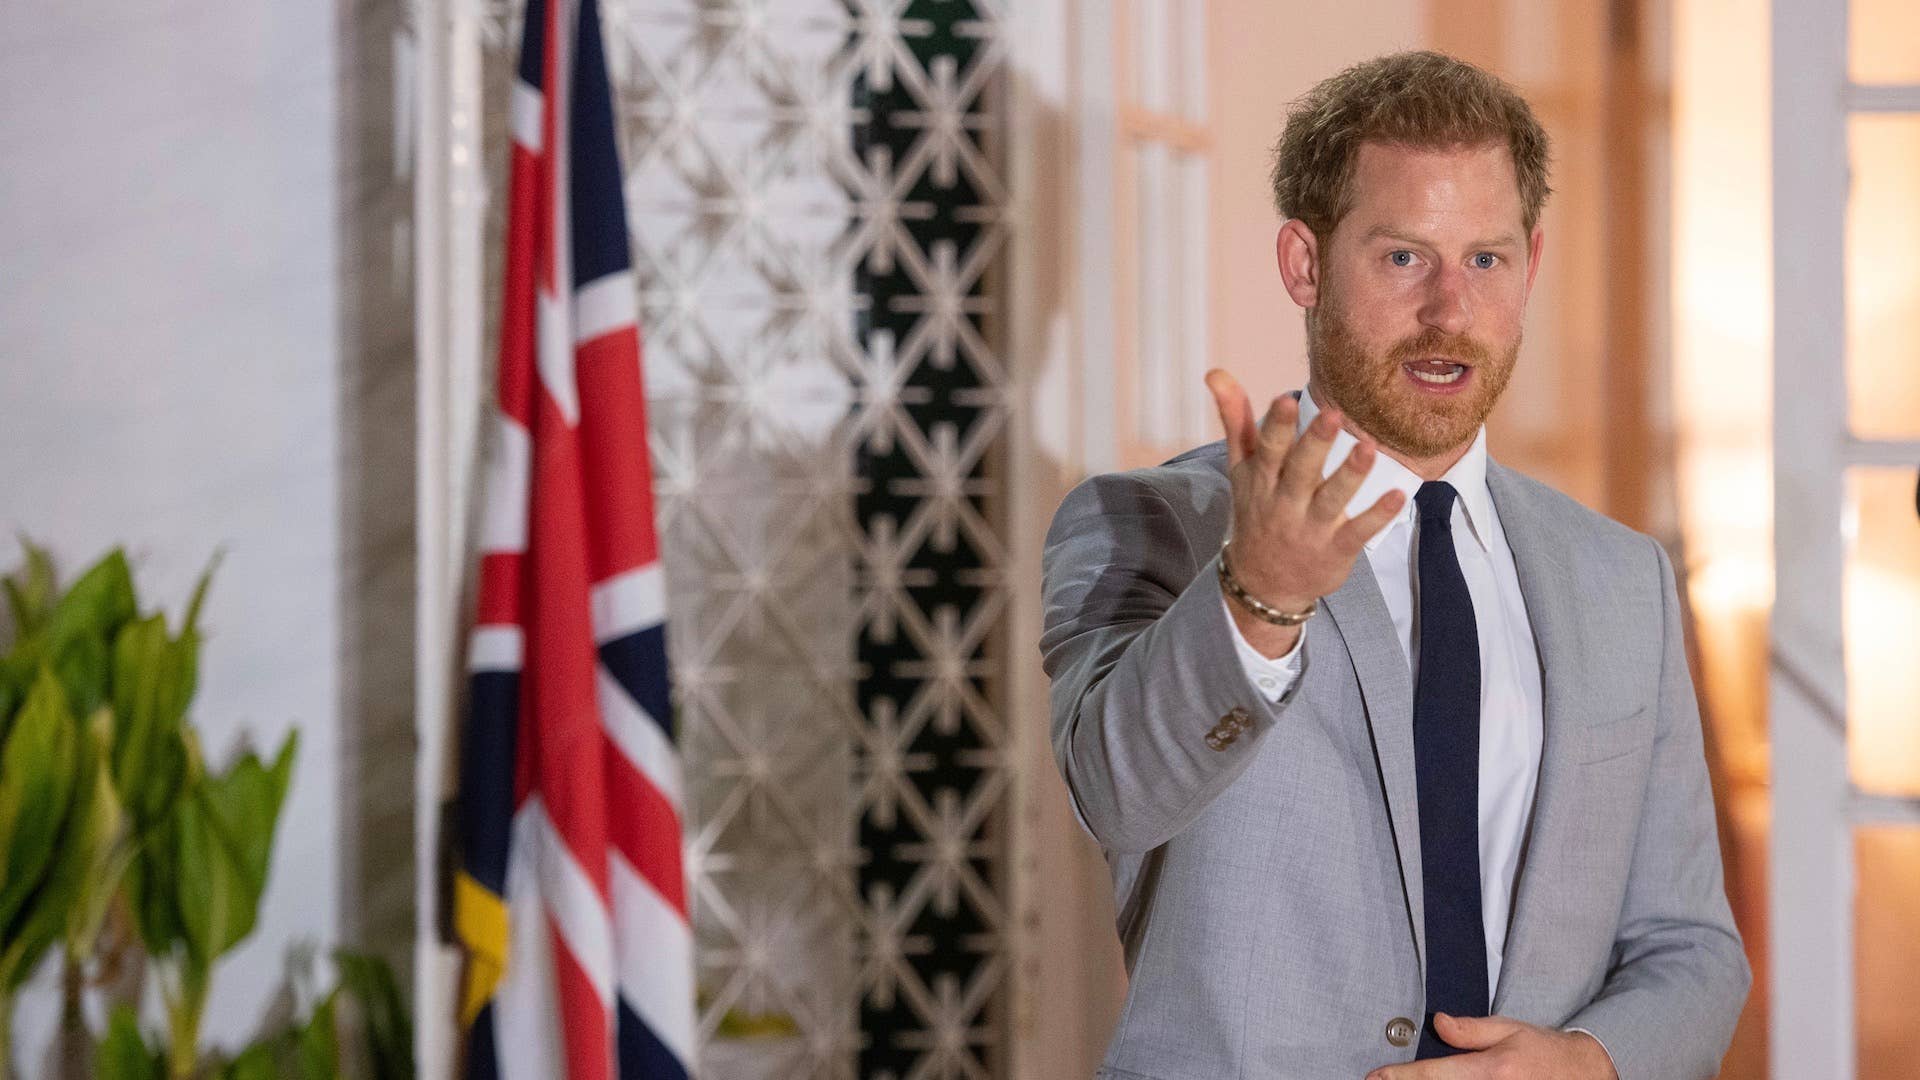 Prince Harry, Duke of Sussex delivers a speech during a reception on day five of the royal tour of Africa